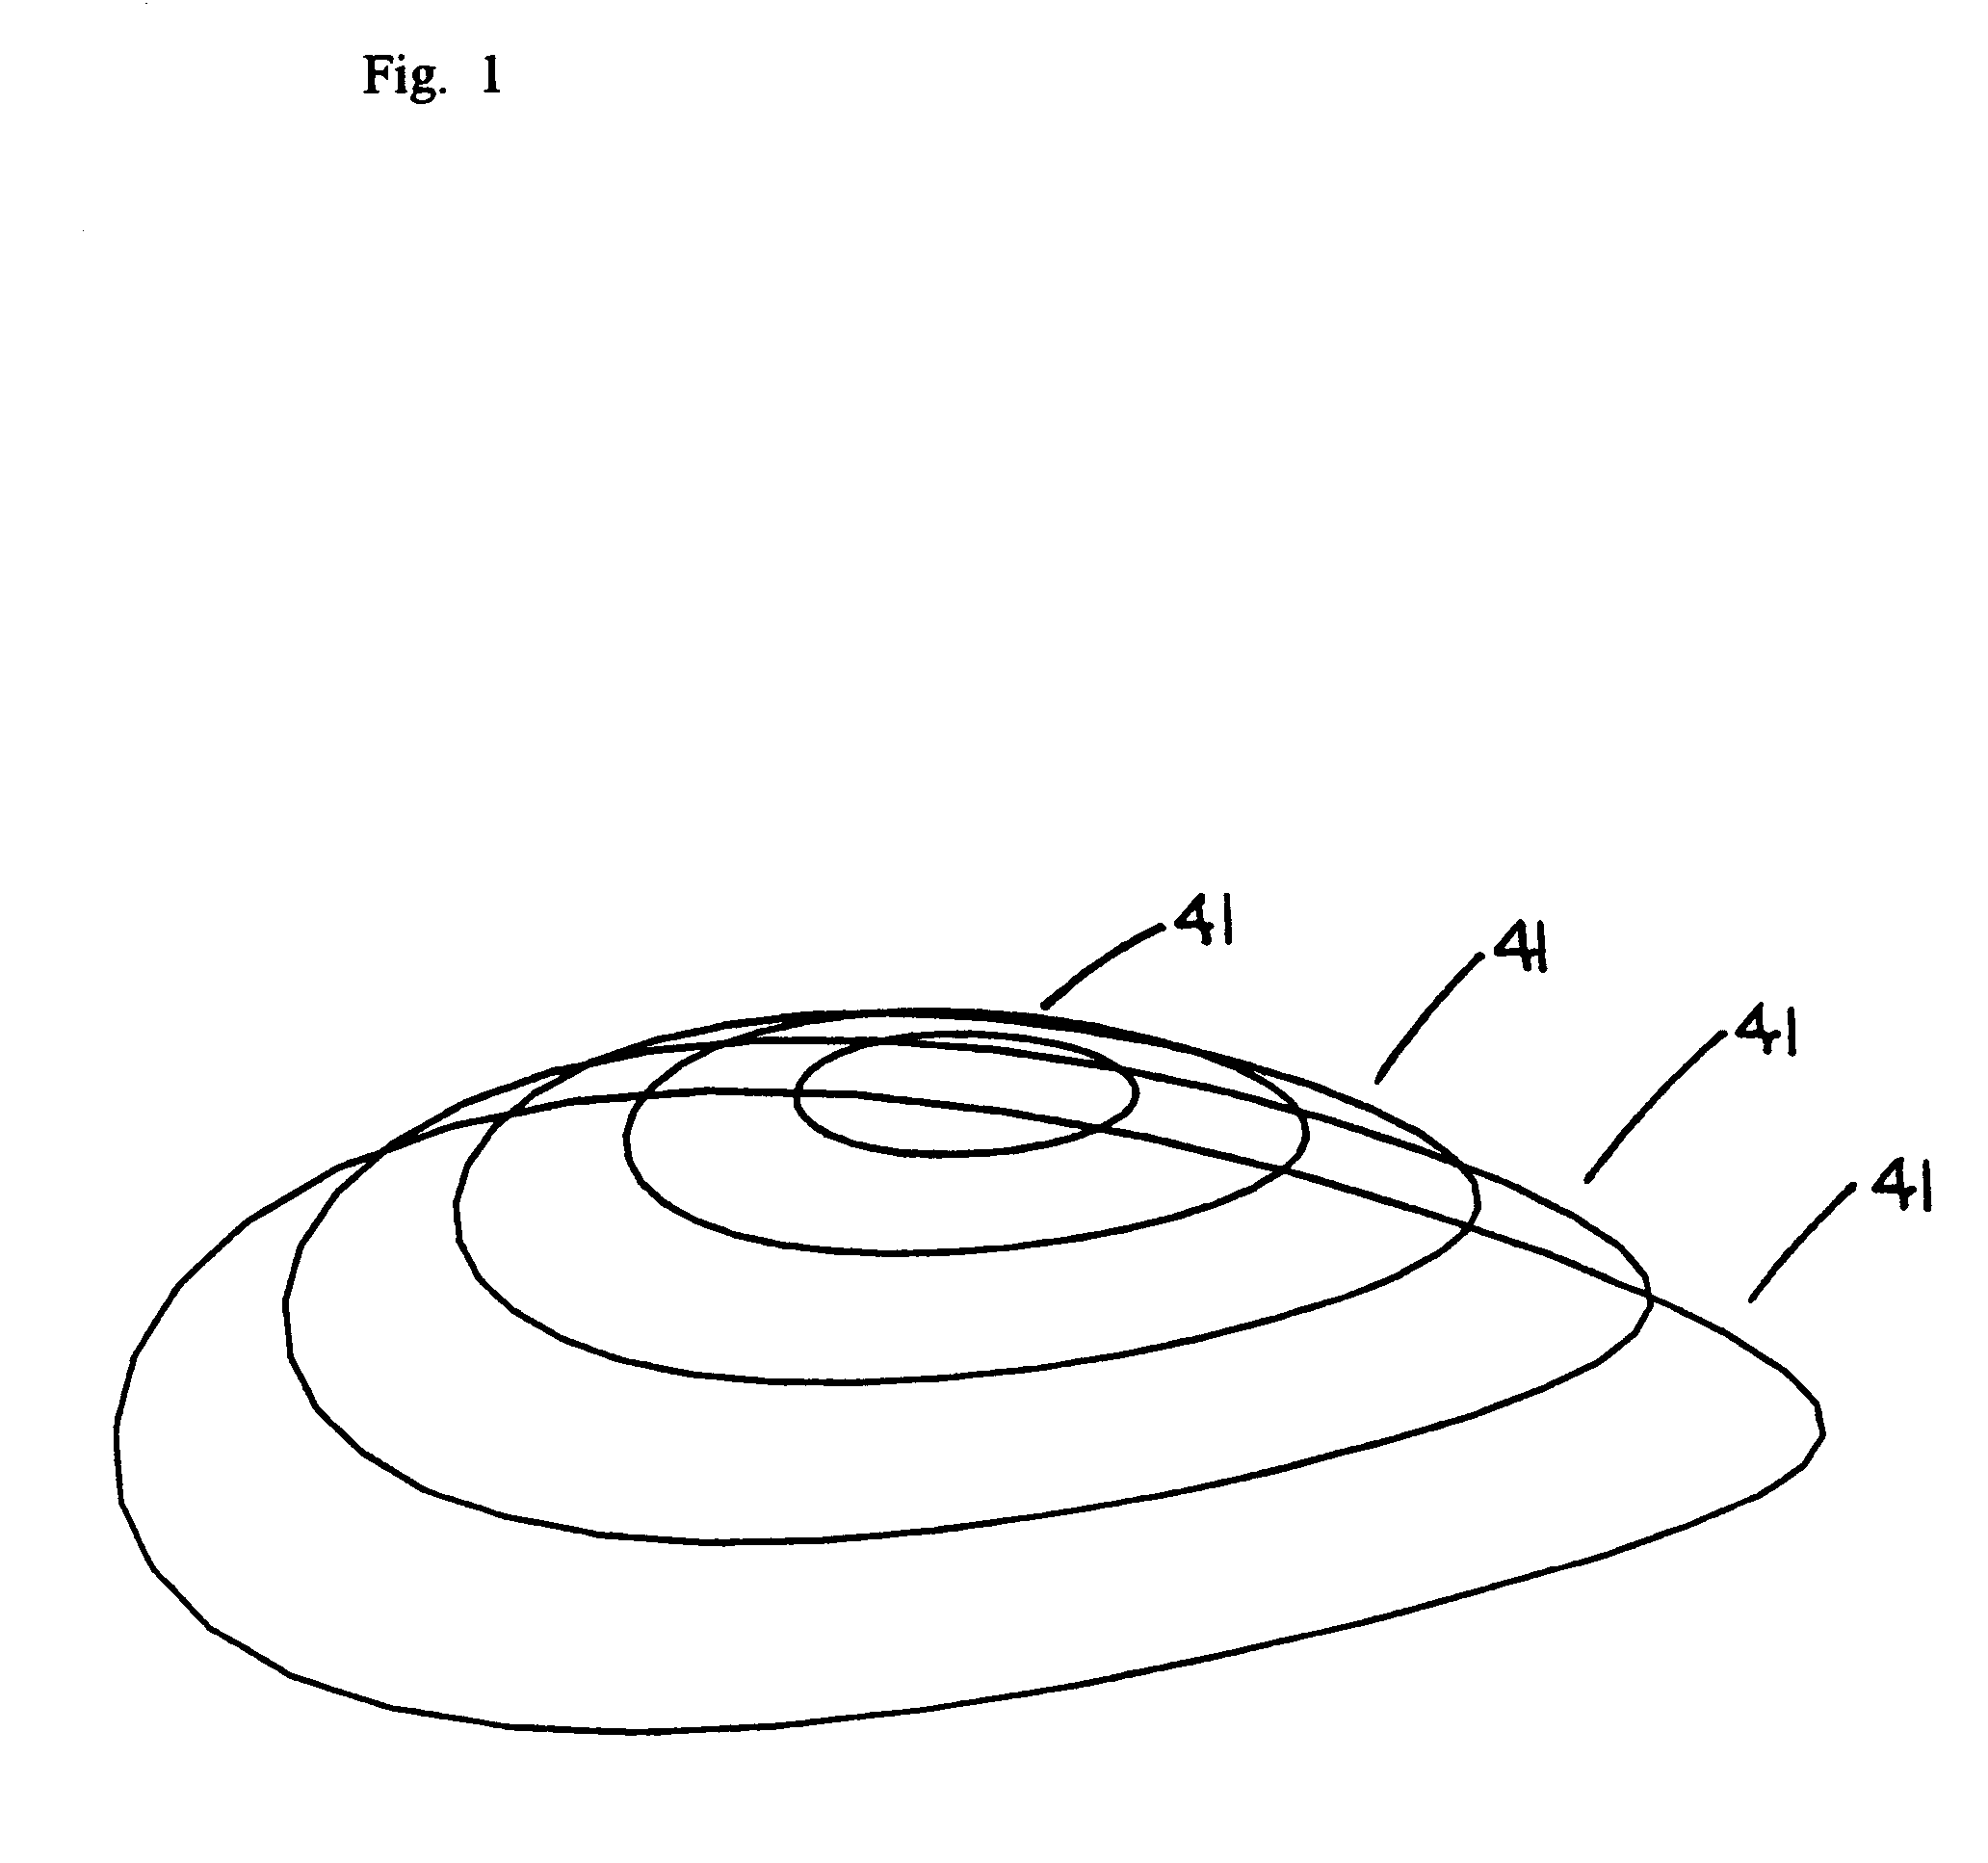 Computer aided contact lens design and fabrication using spline surfaces